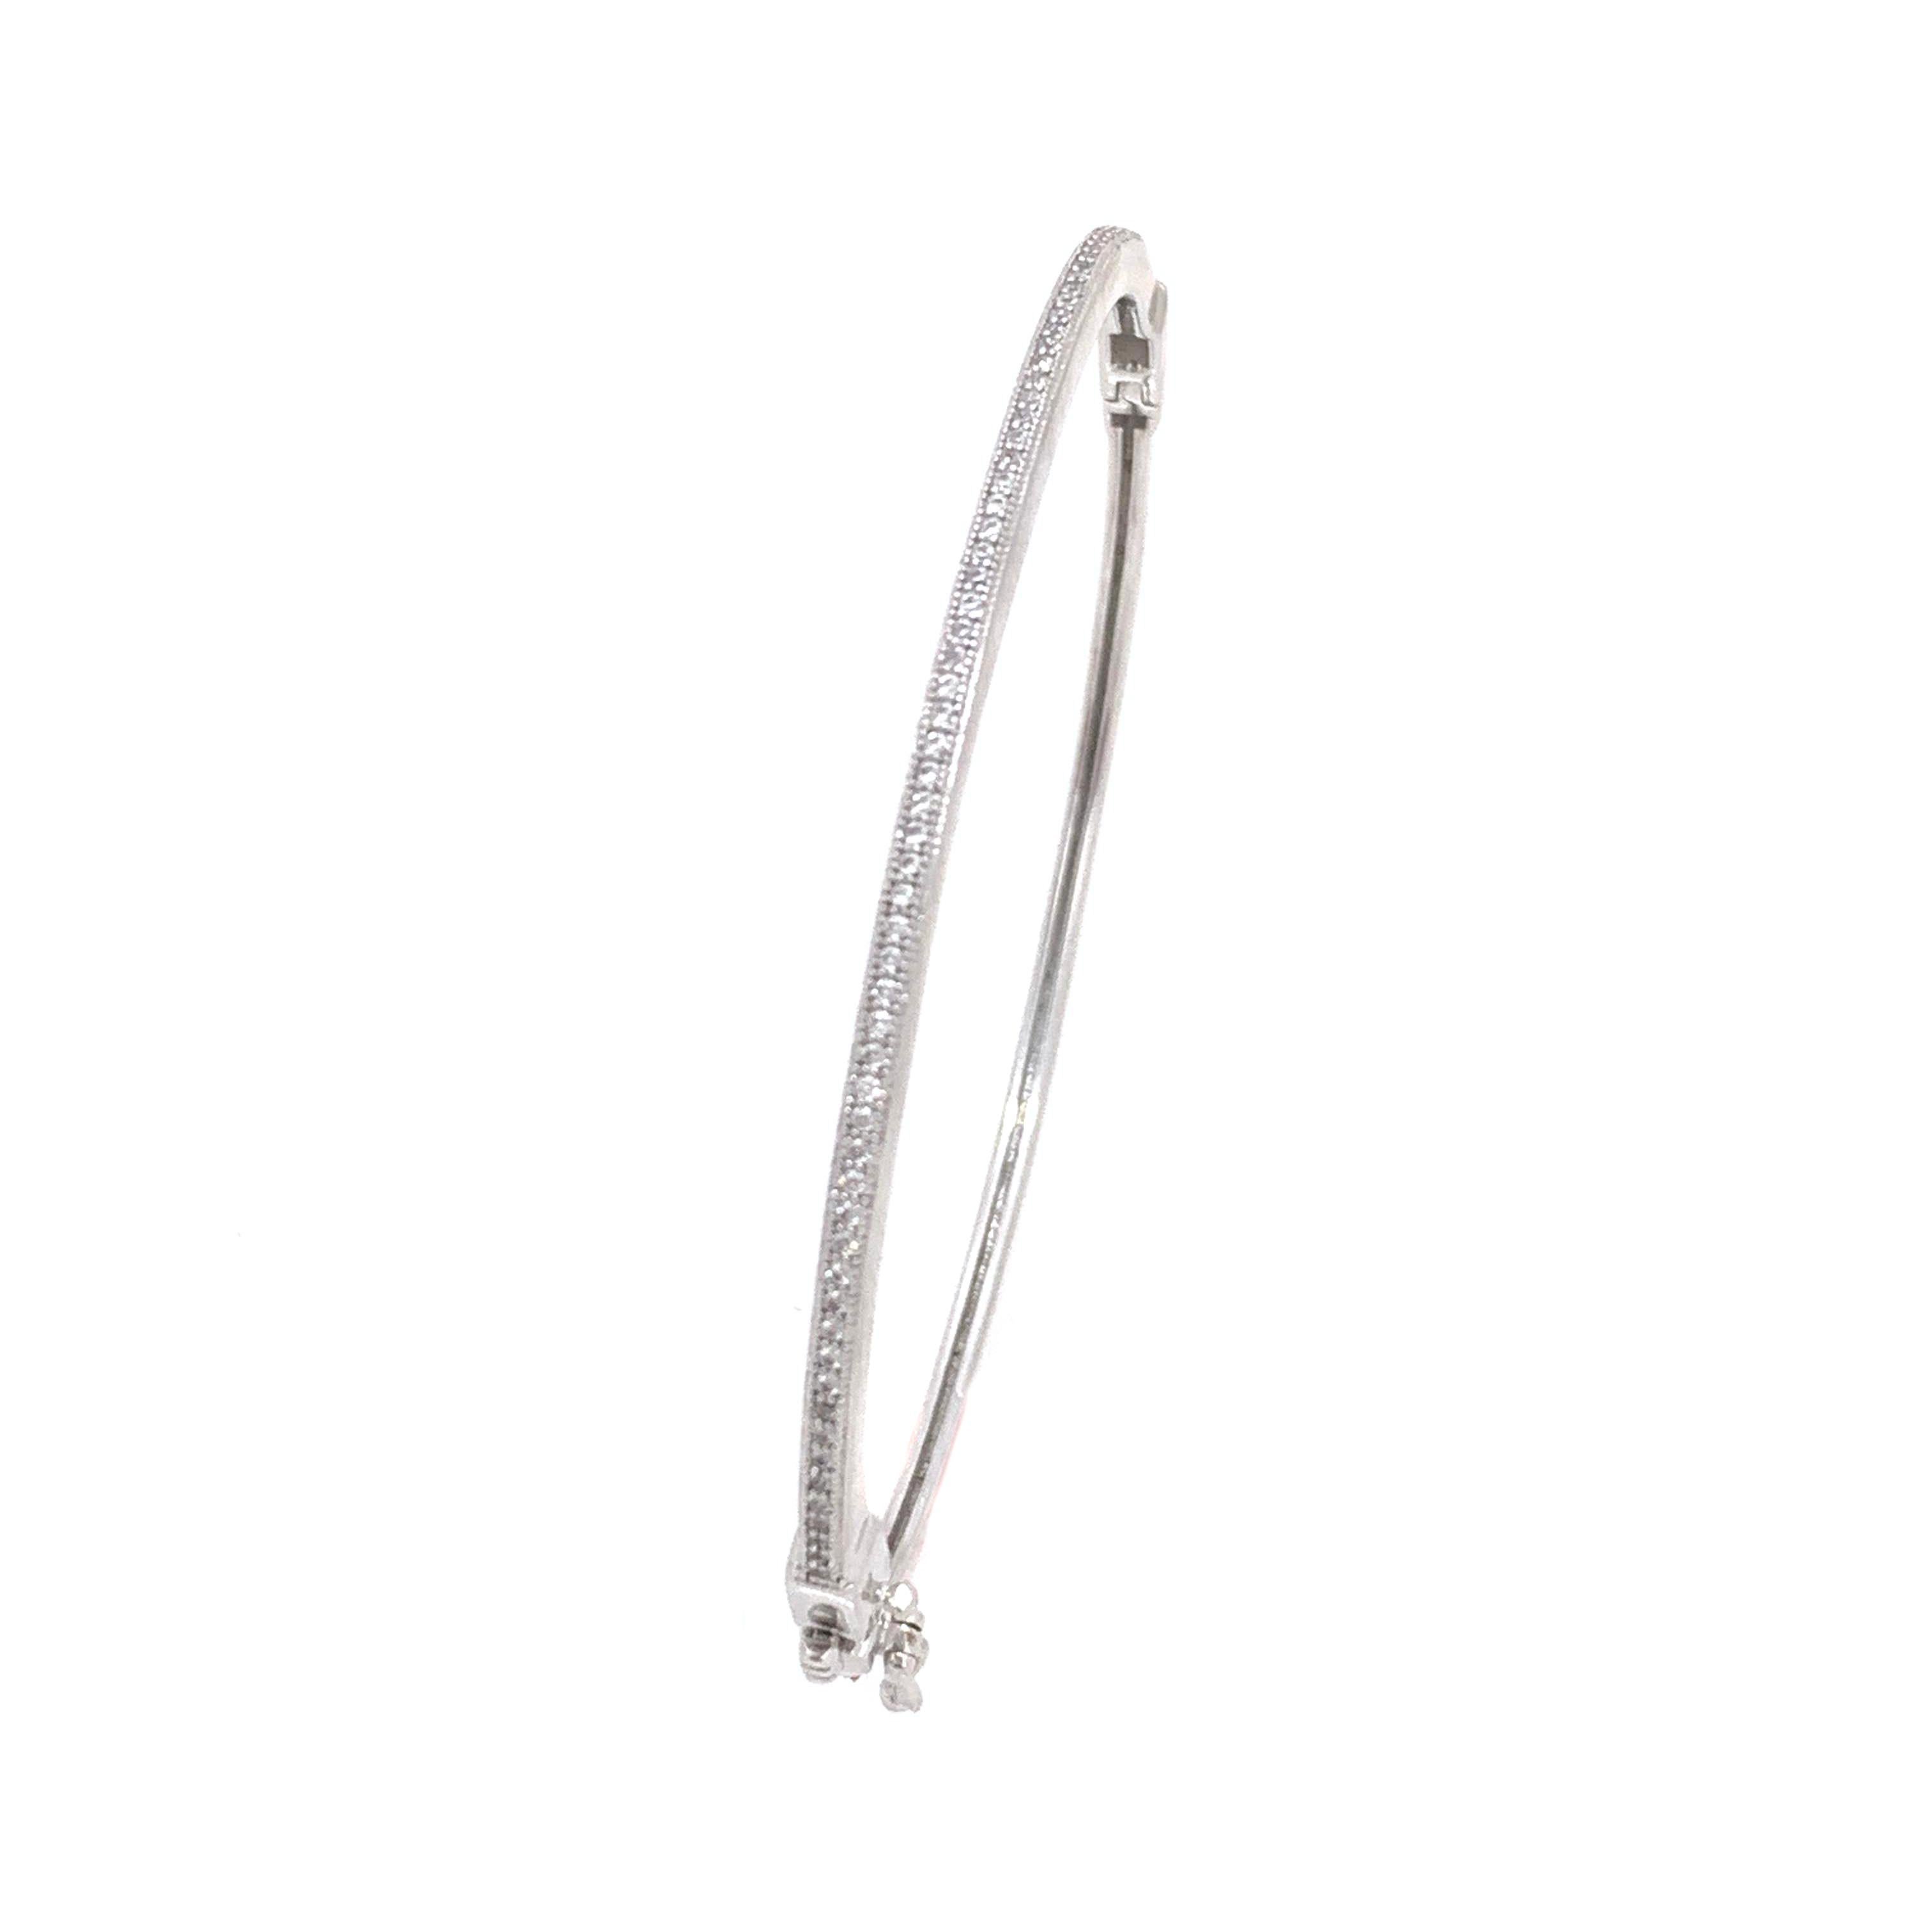 Skinny Micropave Simulated Diamond Sterling Silver Bangle Bracelet.

This chic and modern skinny bracelet features over 72 pcs of round simulated diamond, micro set on platinum rhodium plated sterling silver, push clasp closure and ‘8’ safety lock.